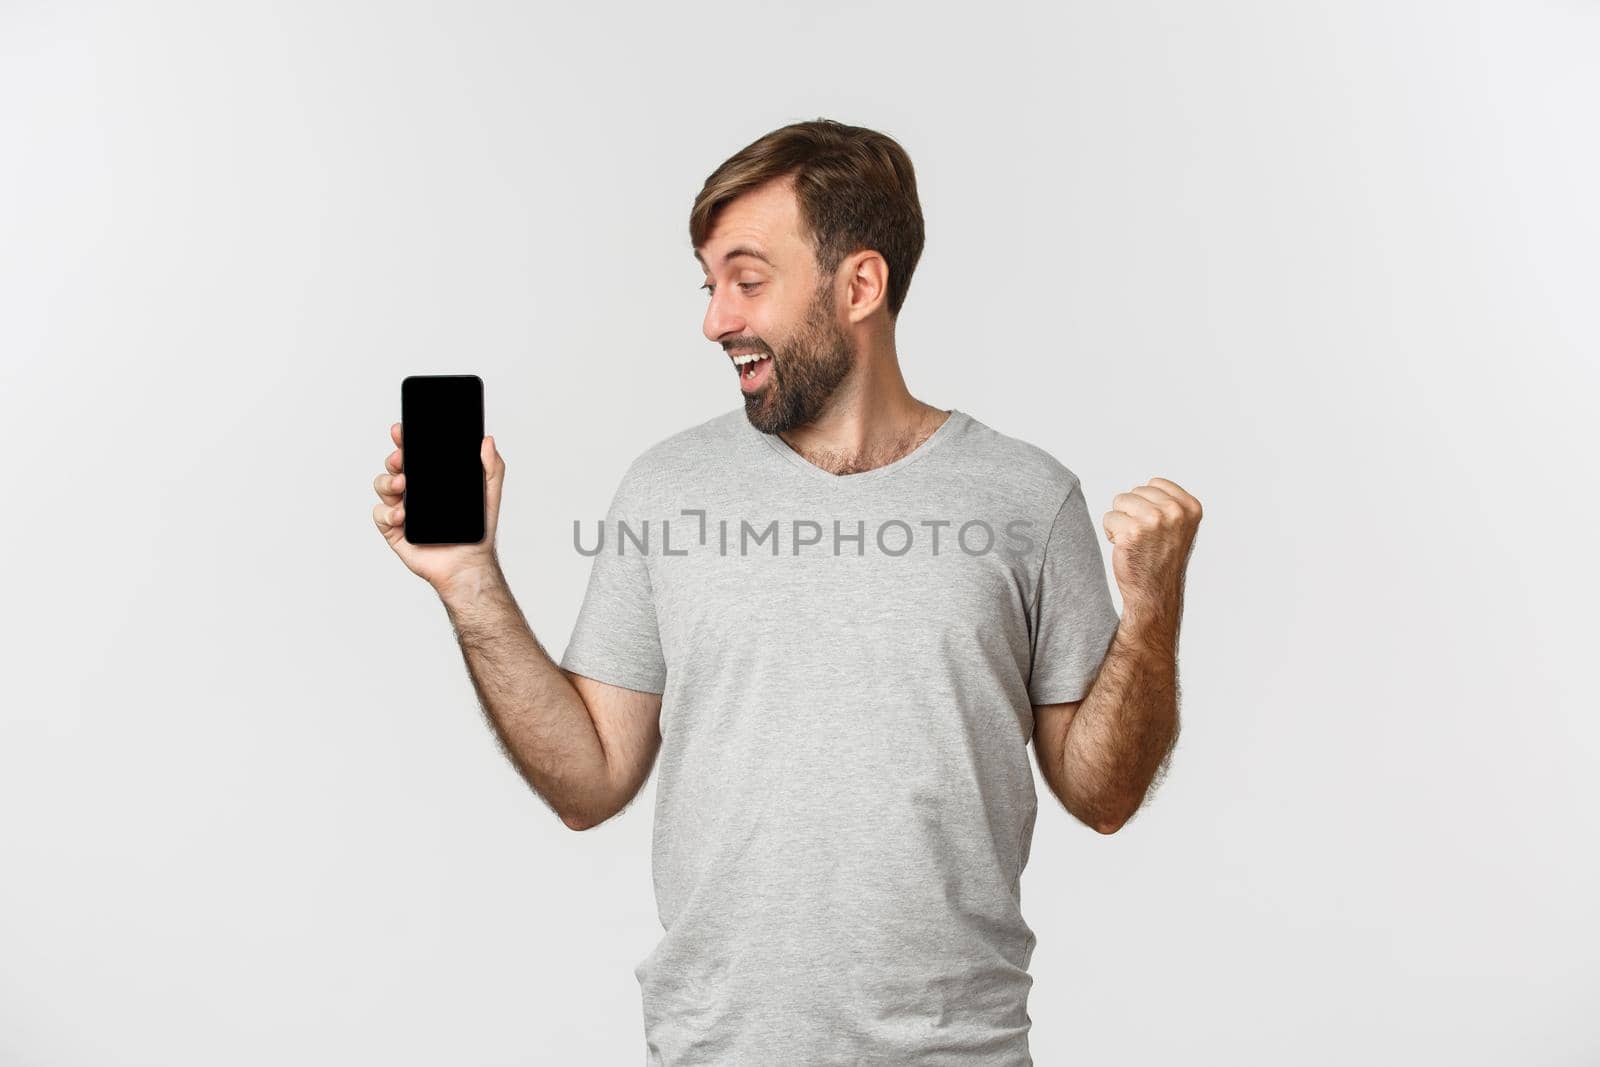 Portrait of excited man with beard, achieve goal in app, showing mobile phone screen and rejoicing, winning something, standing over white background.